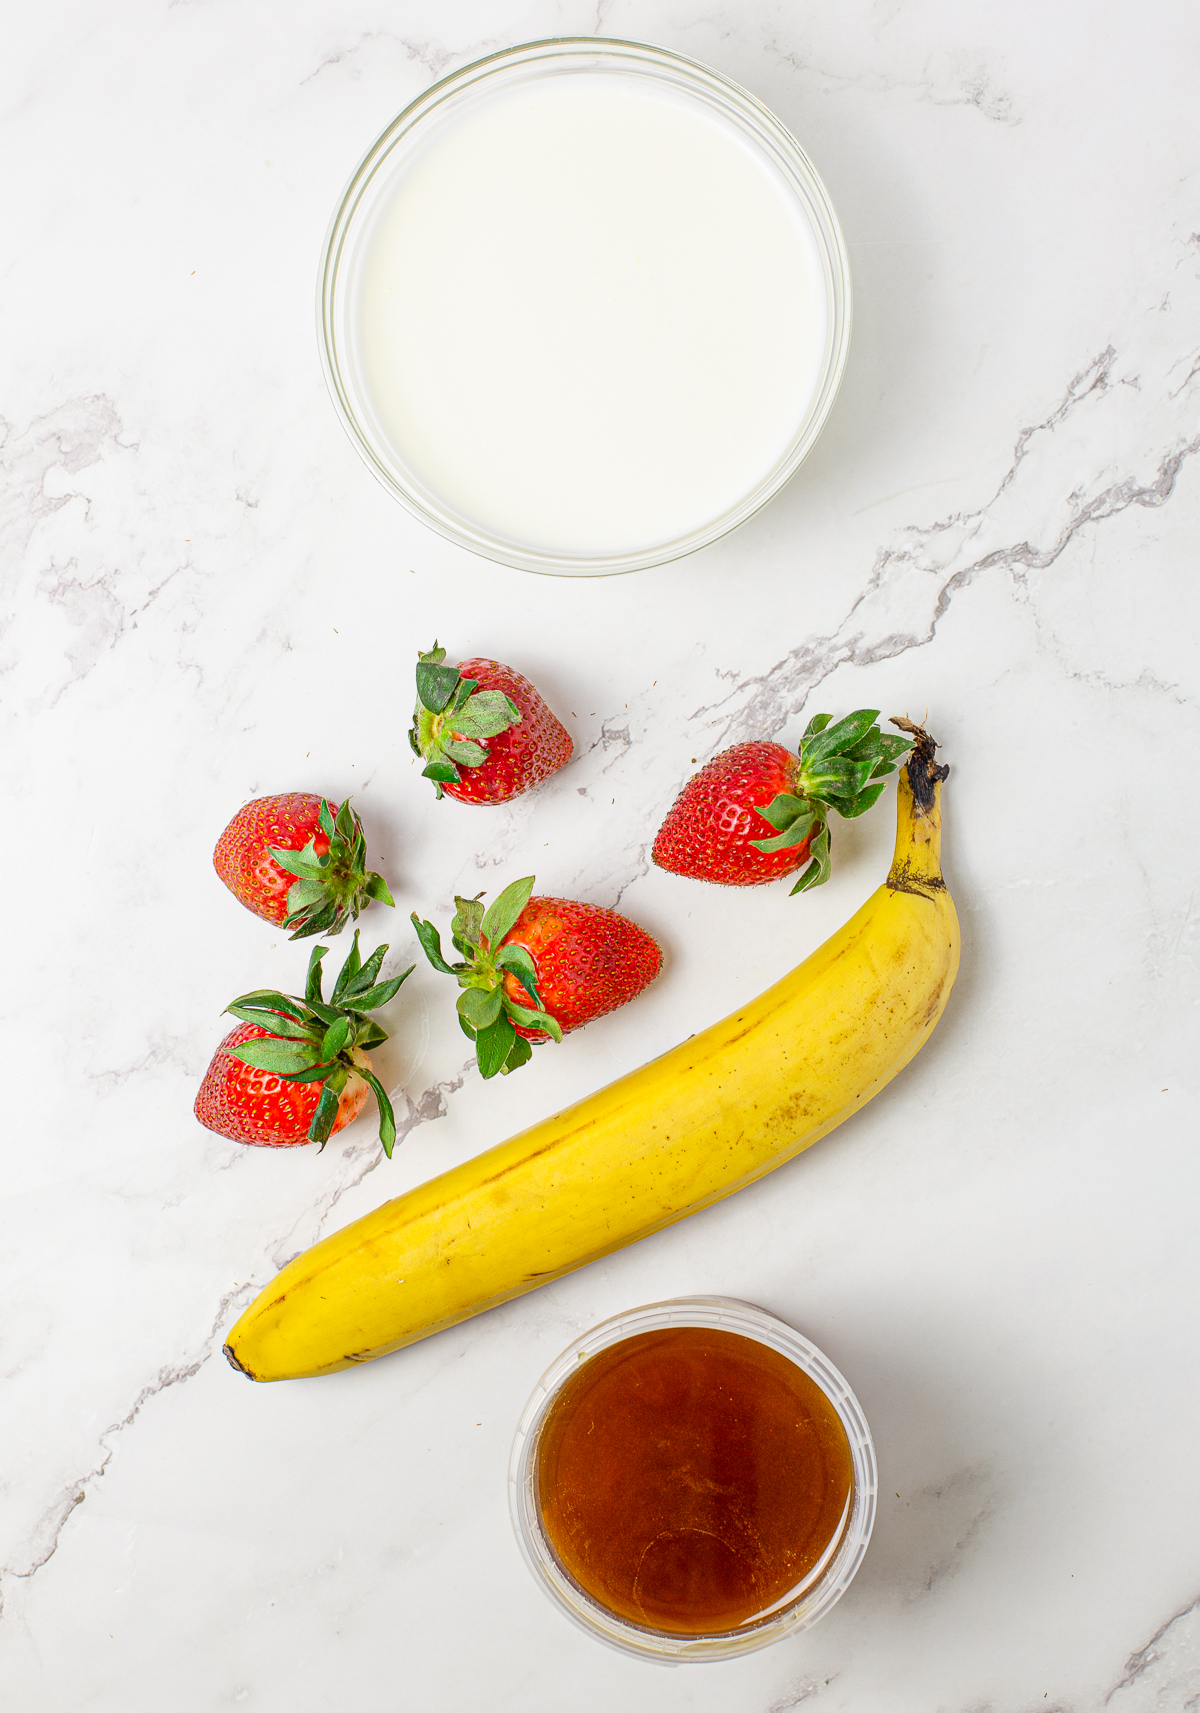 Ingredients needed to make a Strawberry Banana Smoothie Recipe